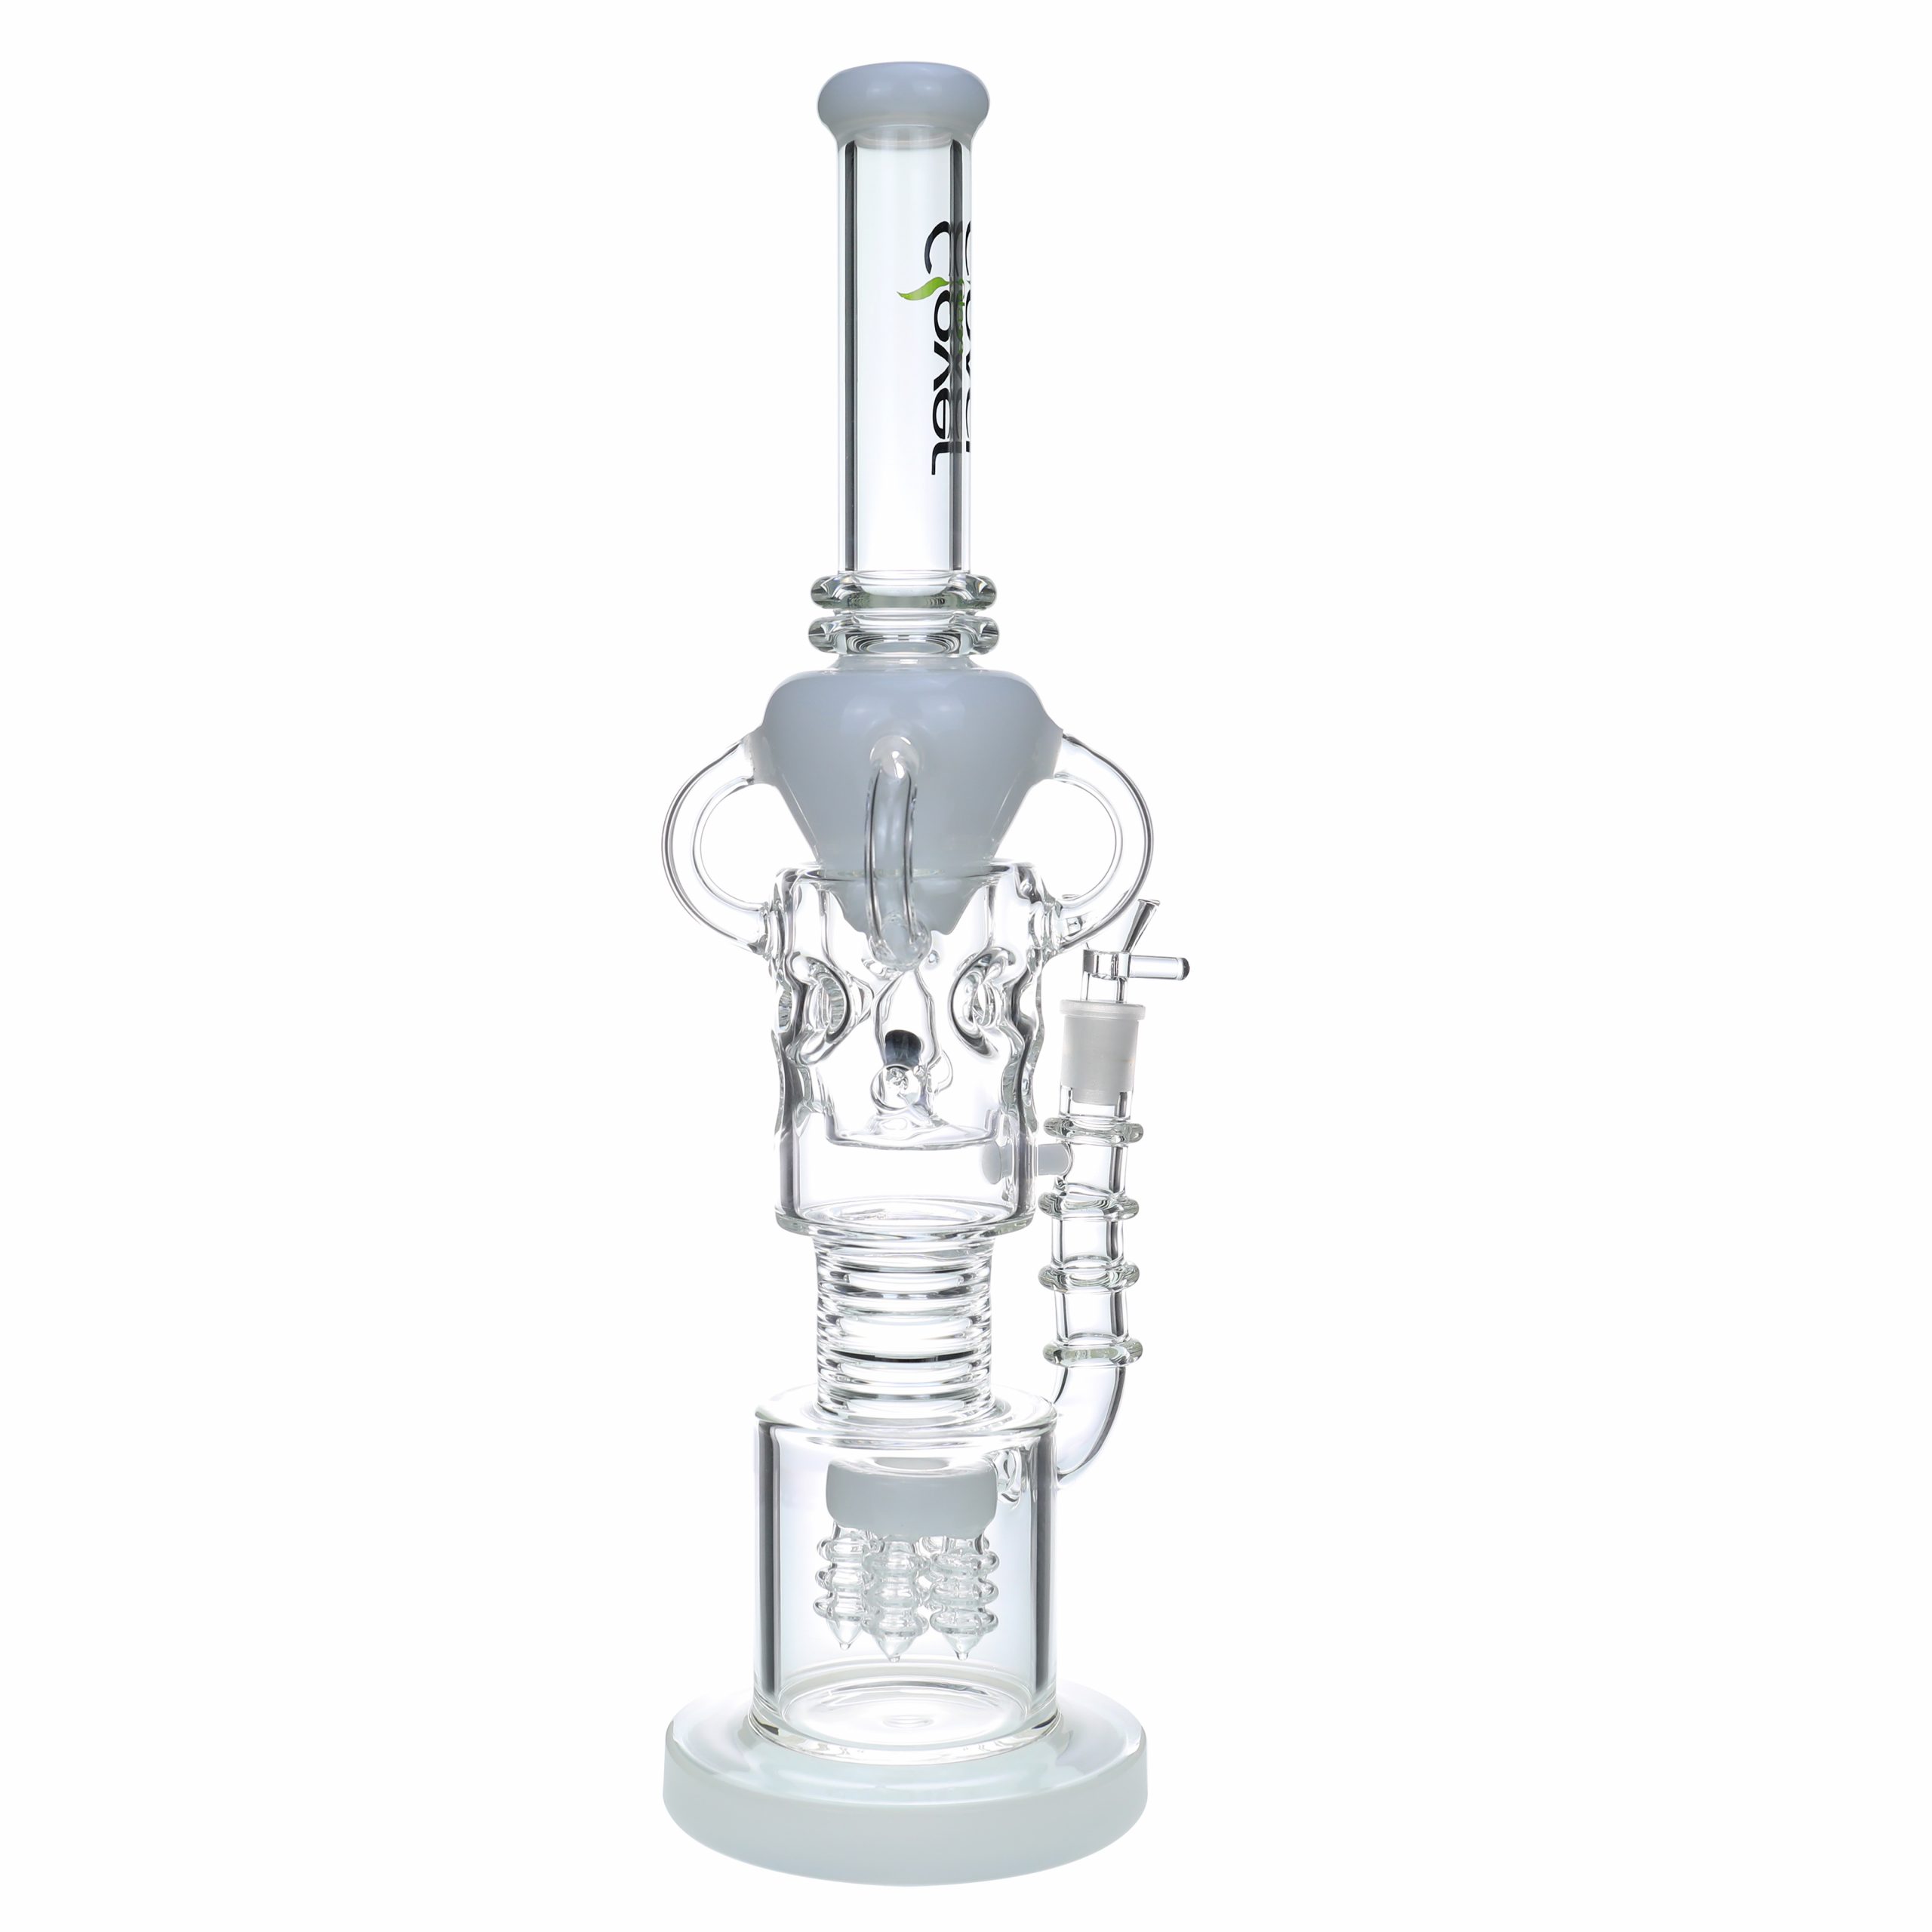 20″ Clover recycler waterpipe with 14mm bowl. – CKZ